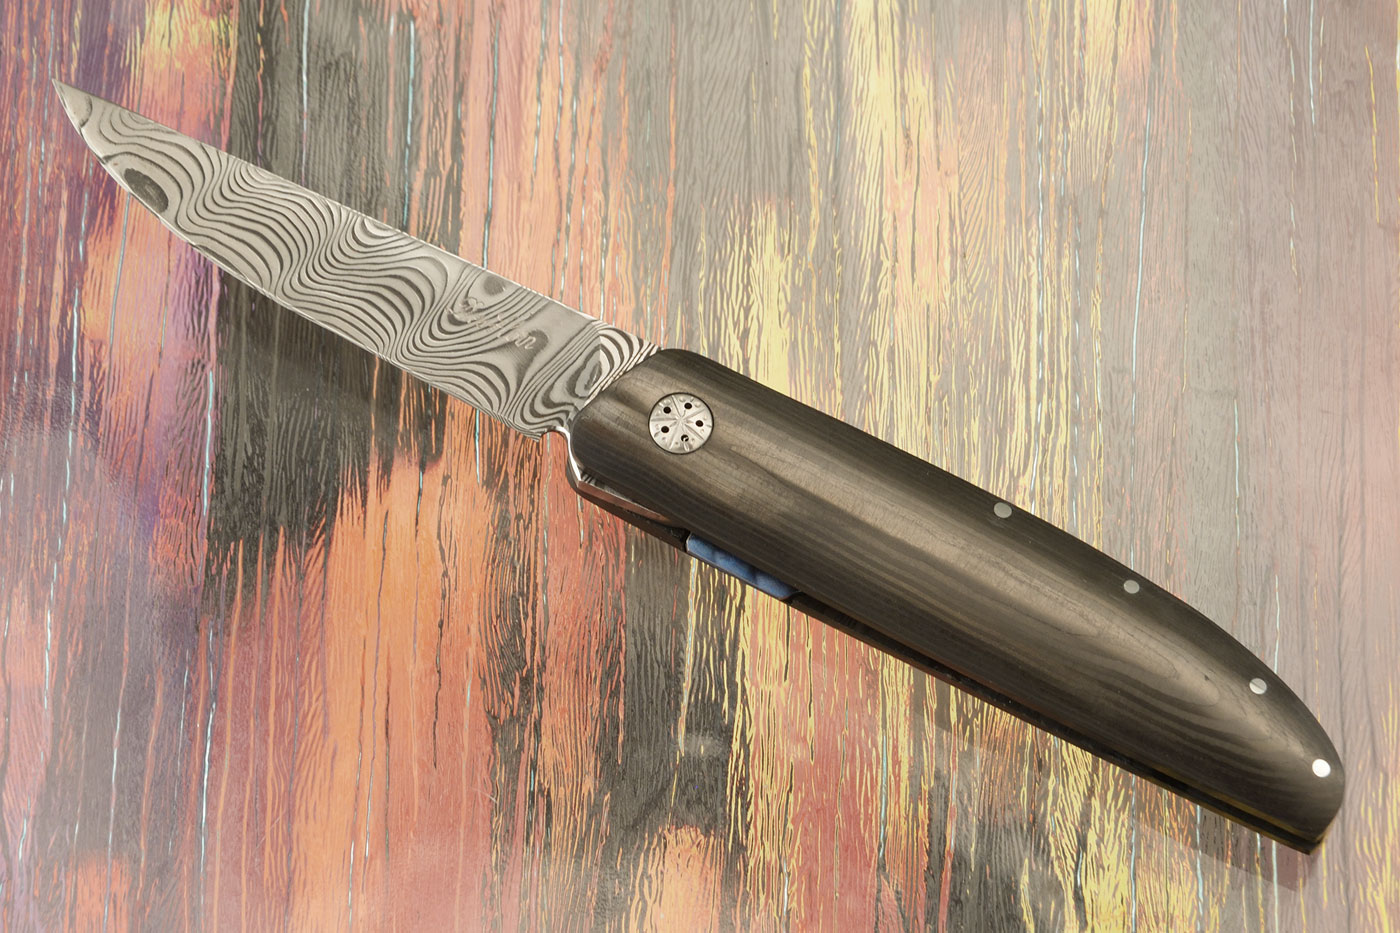 Model 450 Ultra-Light with Damasteel and Uni-Directional Carbon Fiber